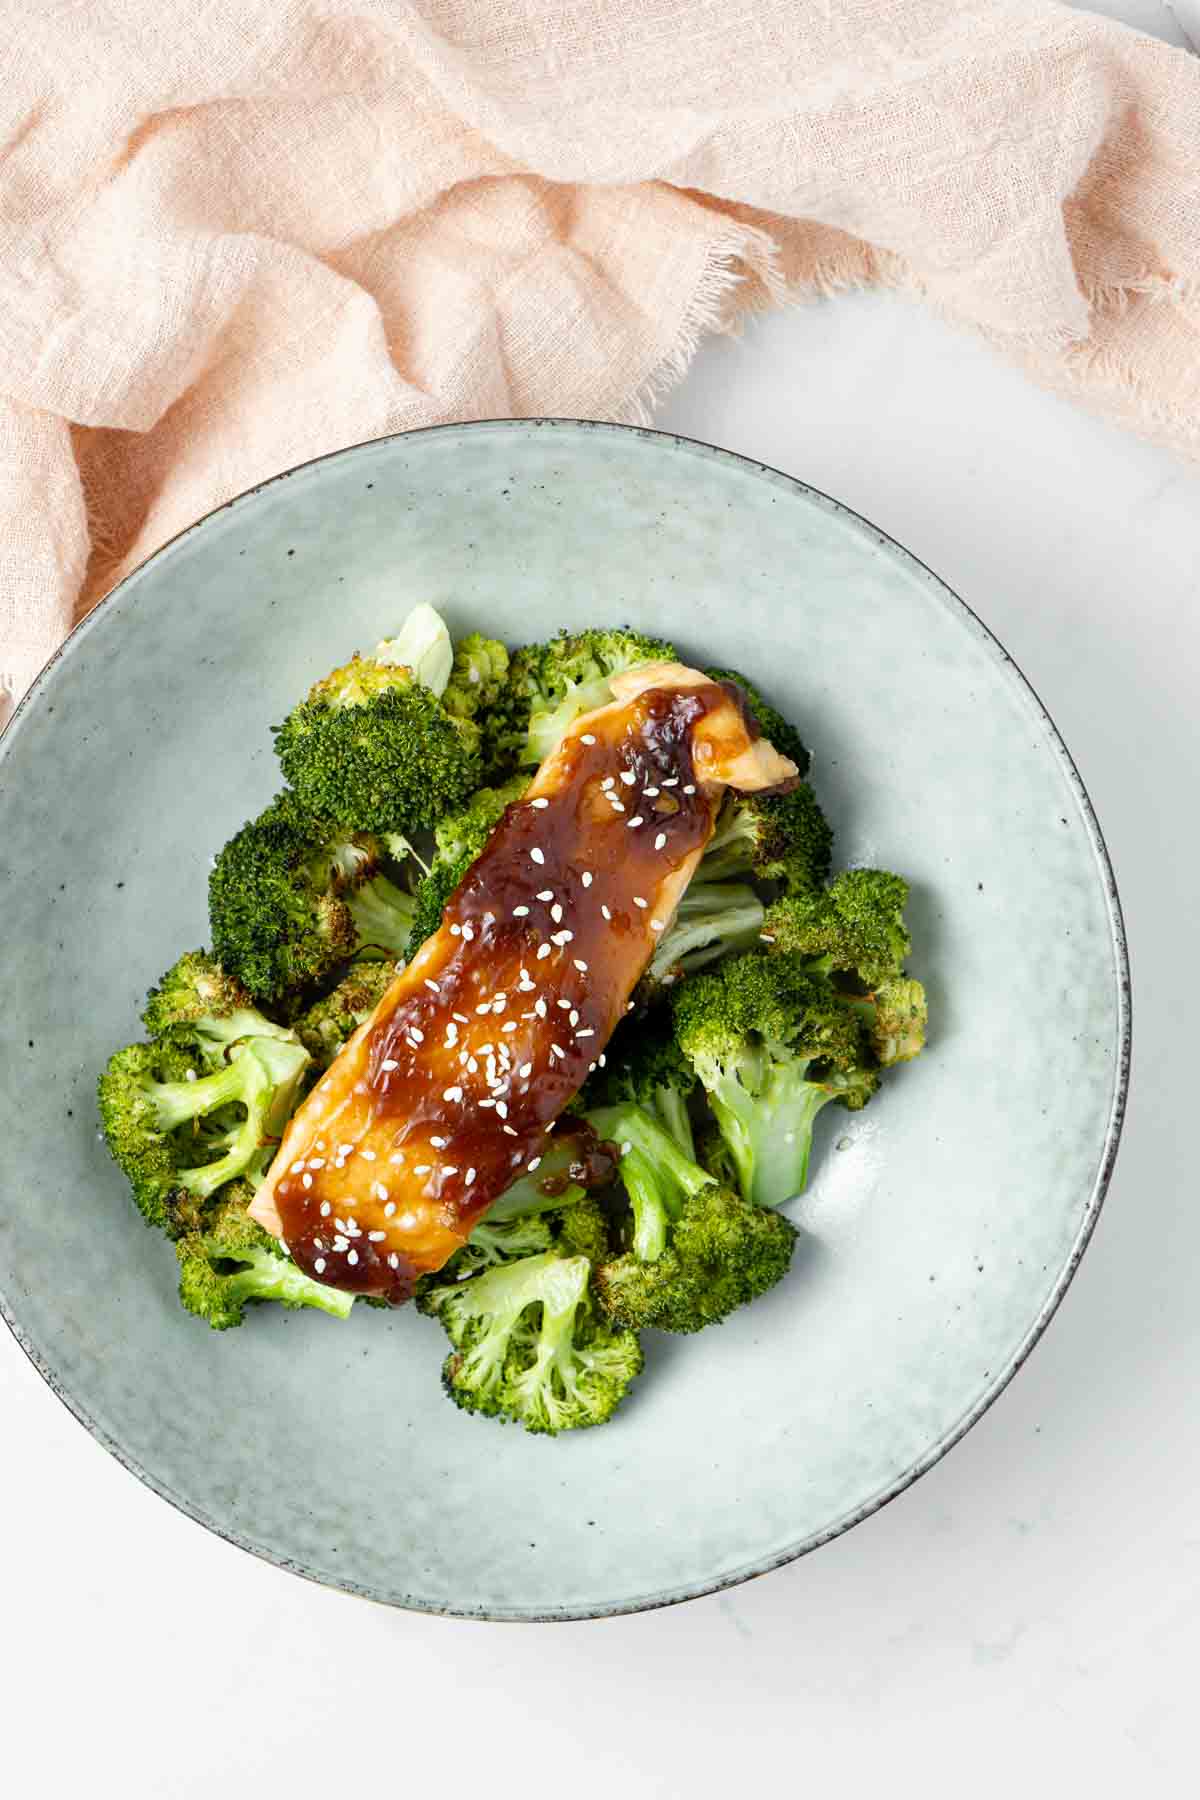 Glazed salmon on a bed of roasted broccoli.